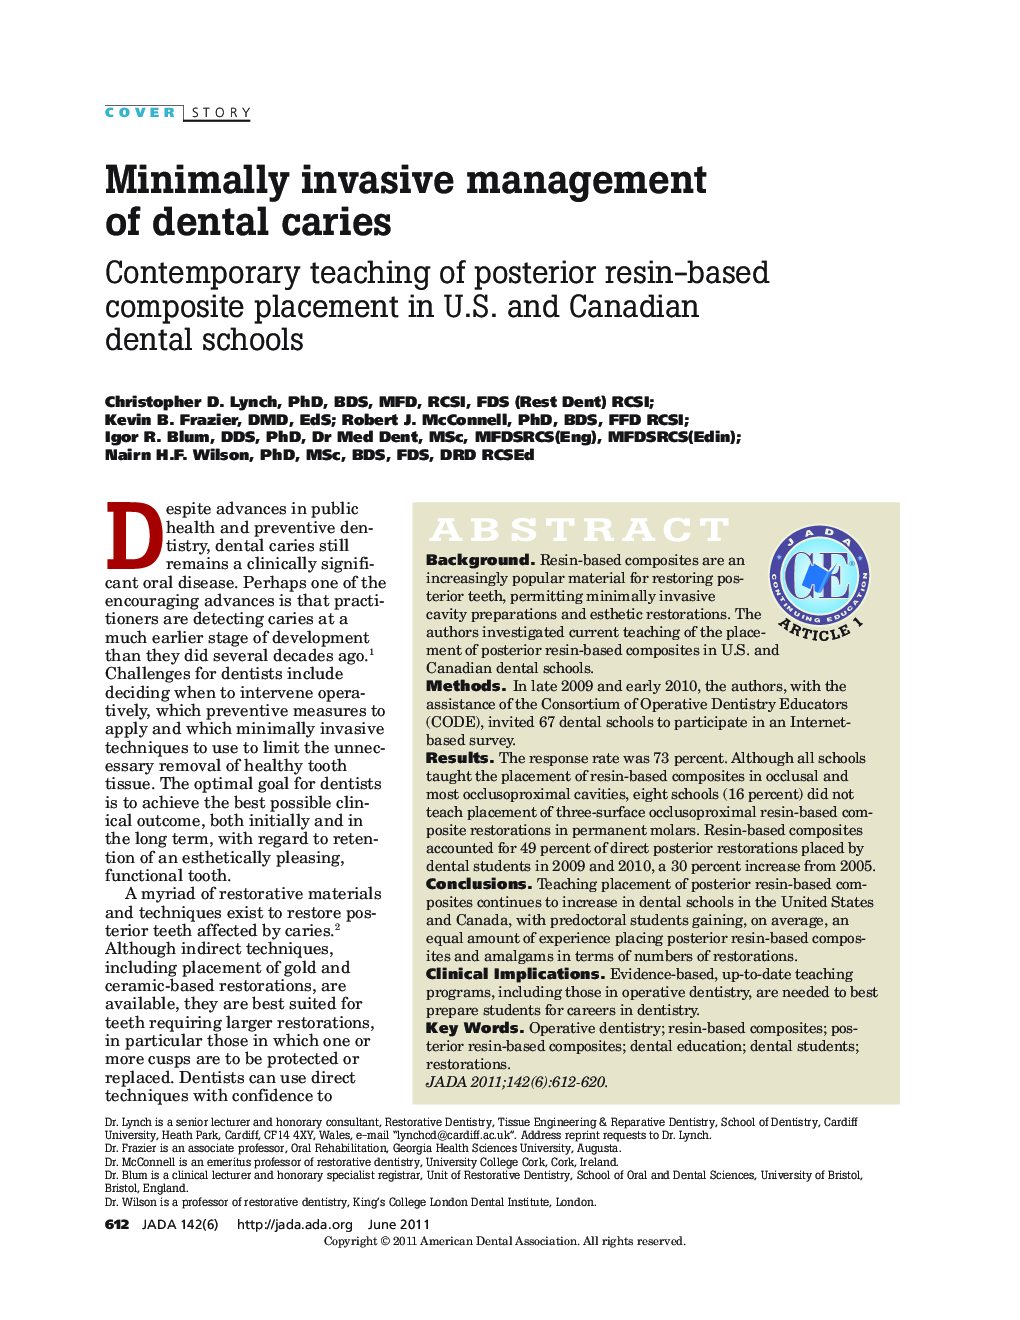 Minimally invasive management of dental caries : Contemporary teaching of posterior resin-based composite placement in U.S. and Canadian dental schools